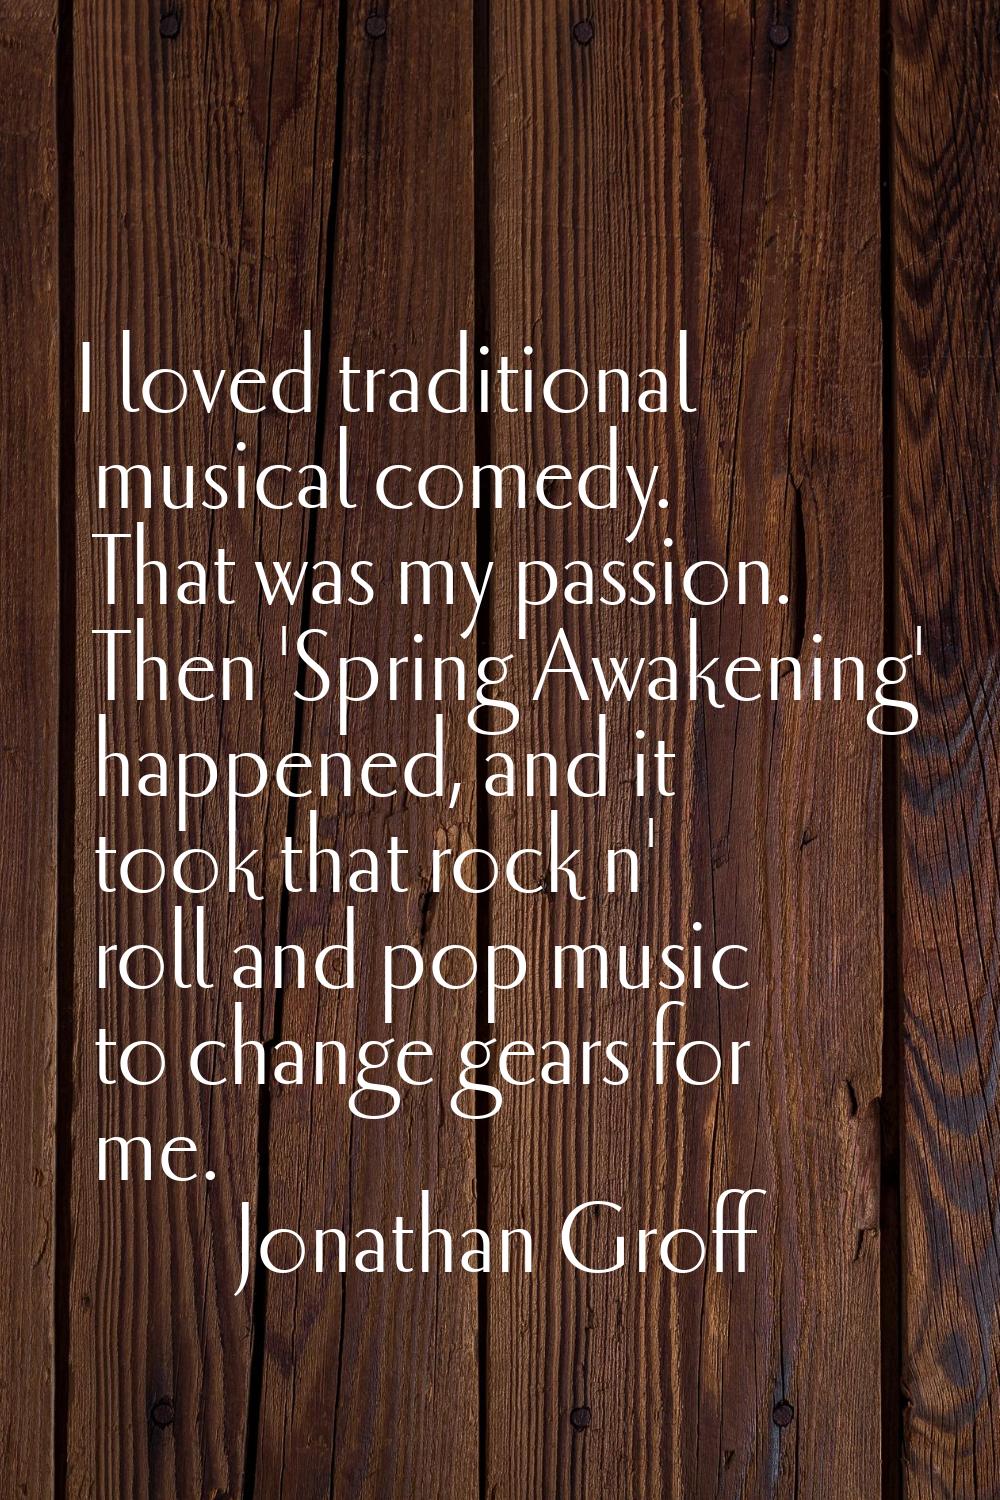 I loved traditional musical comedy. That was my passion. Then 'Spring Awakening' happened, and it t